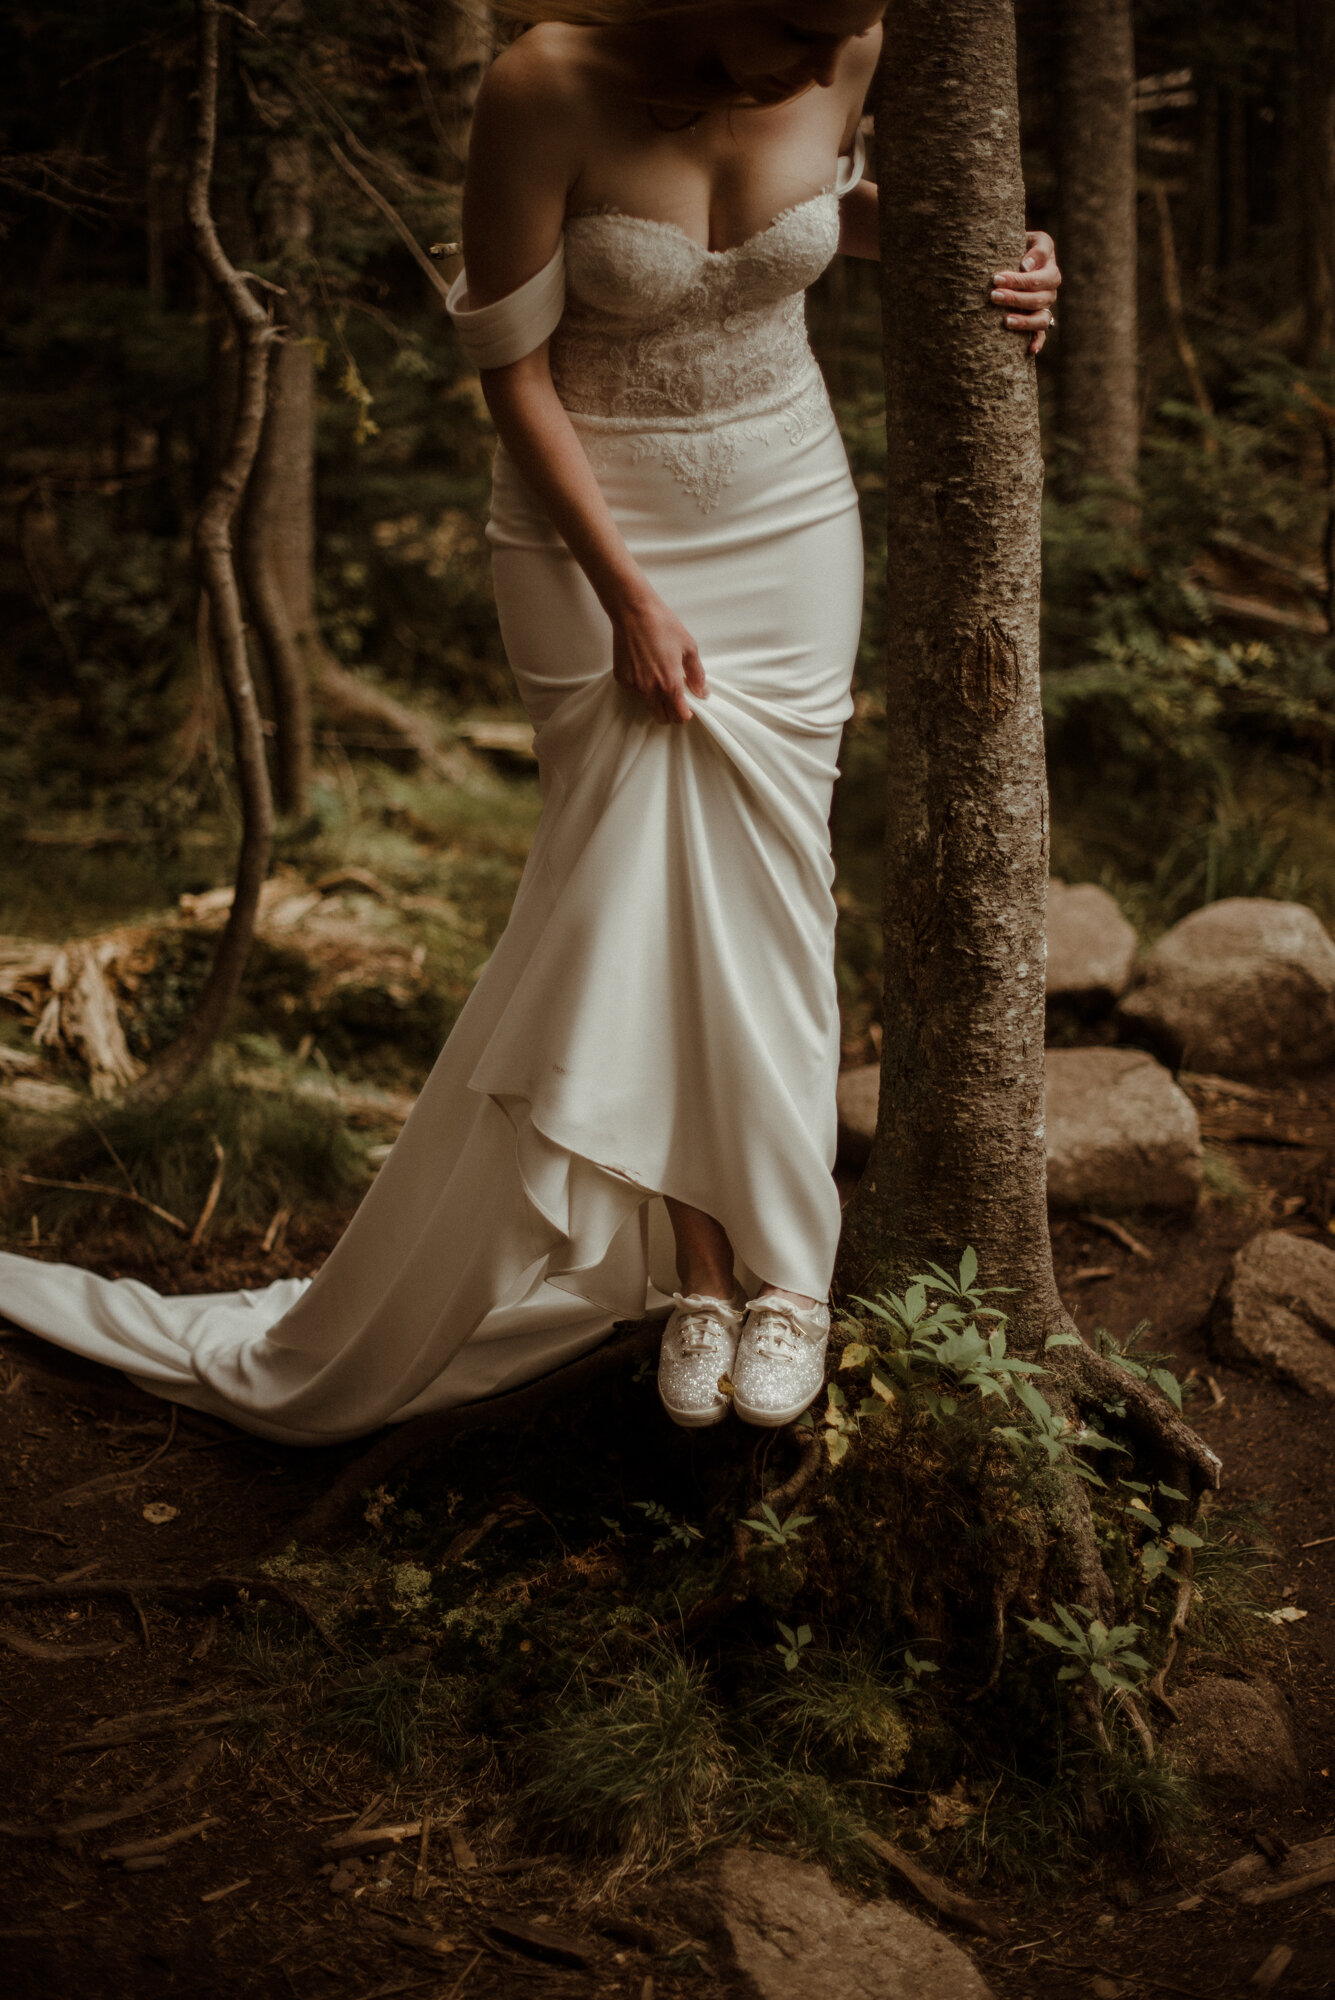 Autumn Elopement in New Hampshire - Backyard Wedding during COVID and Sunrise Hike in Wedding Dress - White Sails Creative_125.jpg